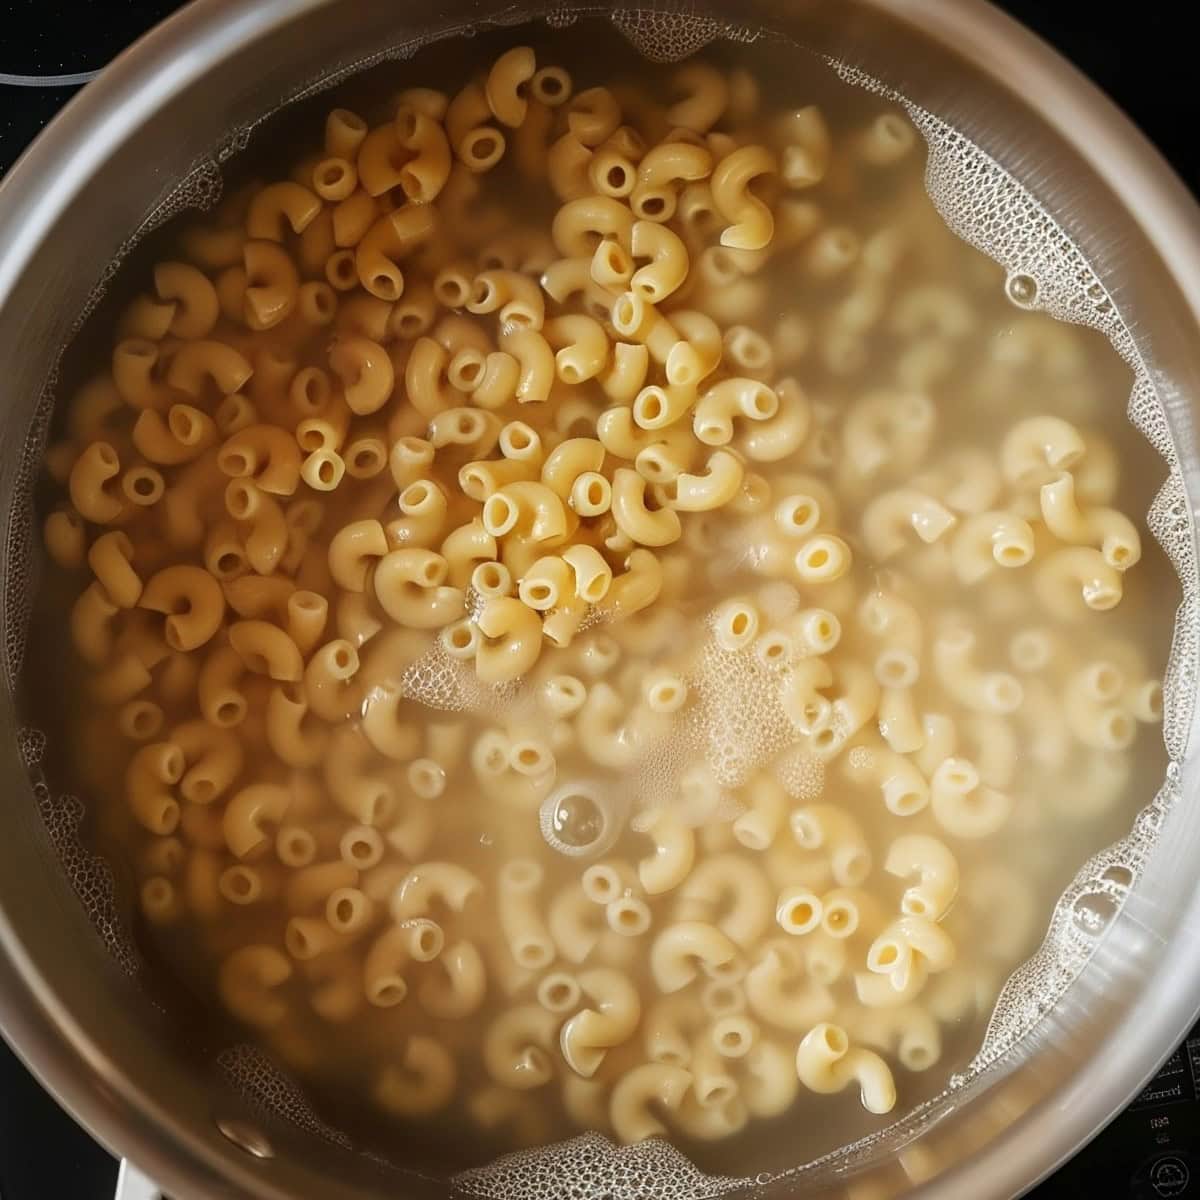 Top View Macaroni Noodles Cooking in Boiling Water in a Saucepan Over the Stove